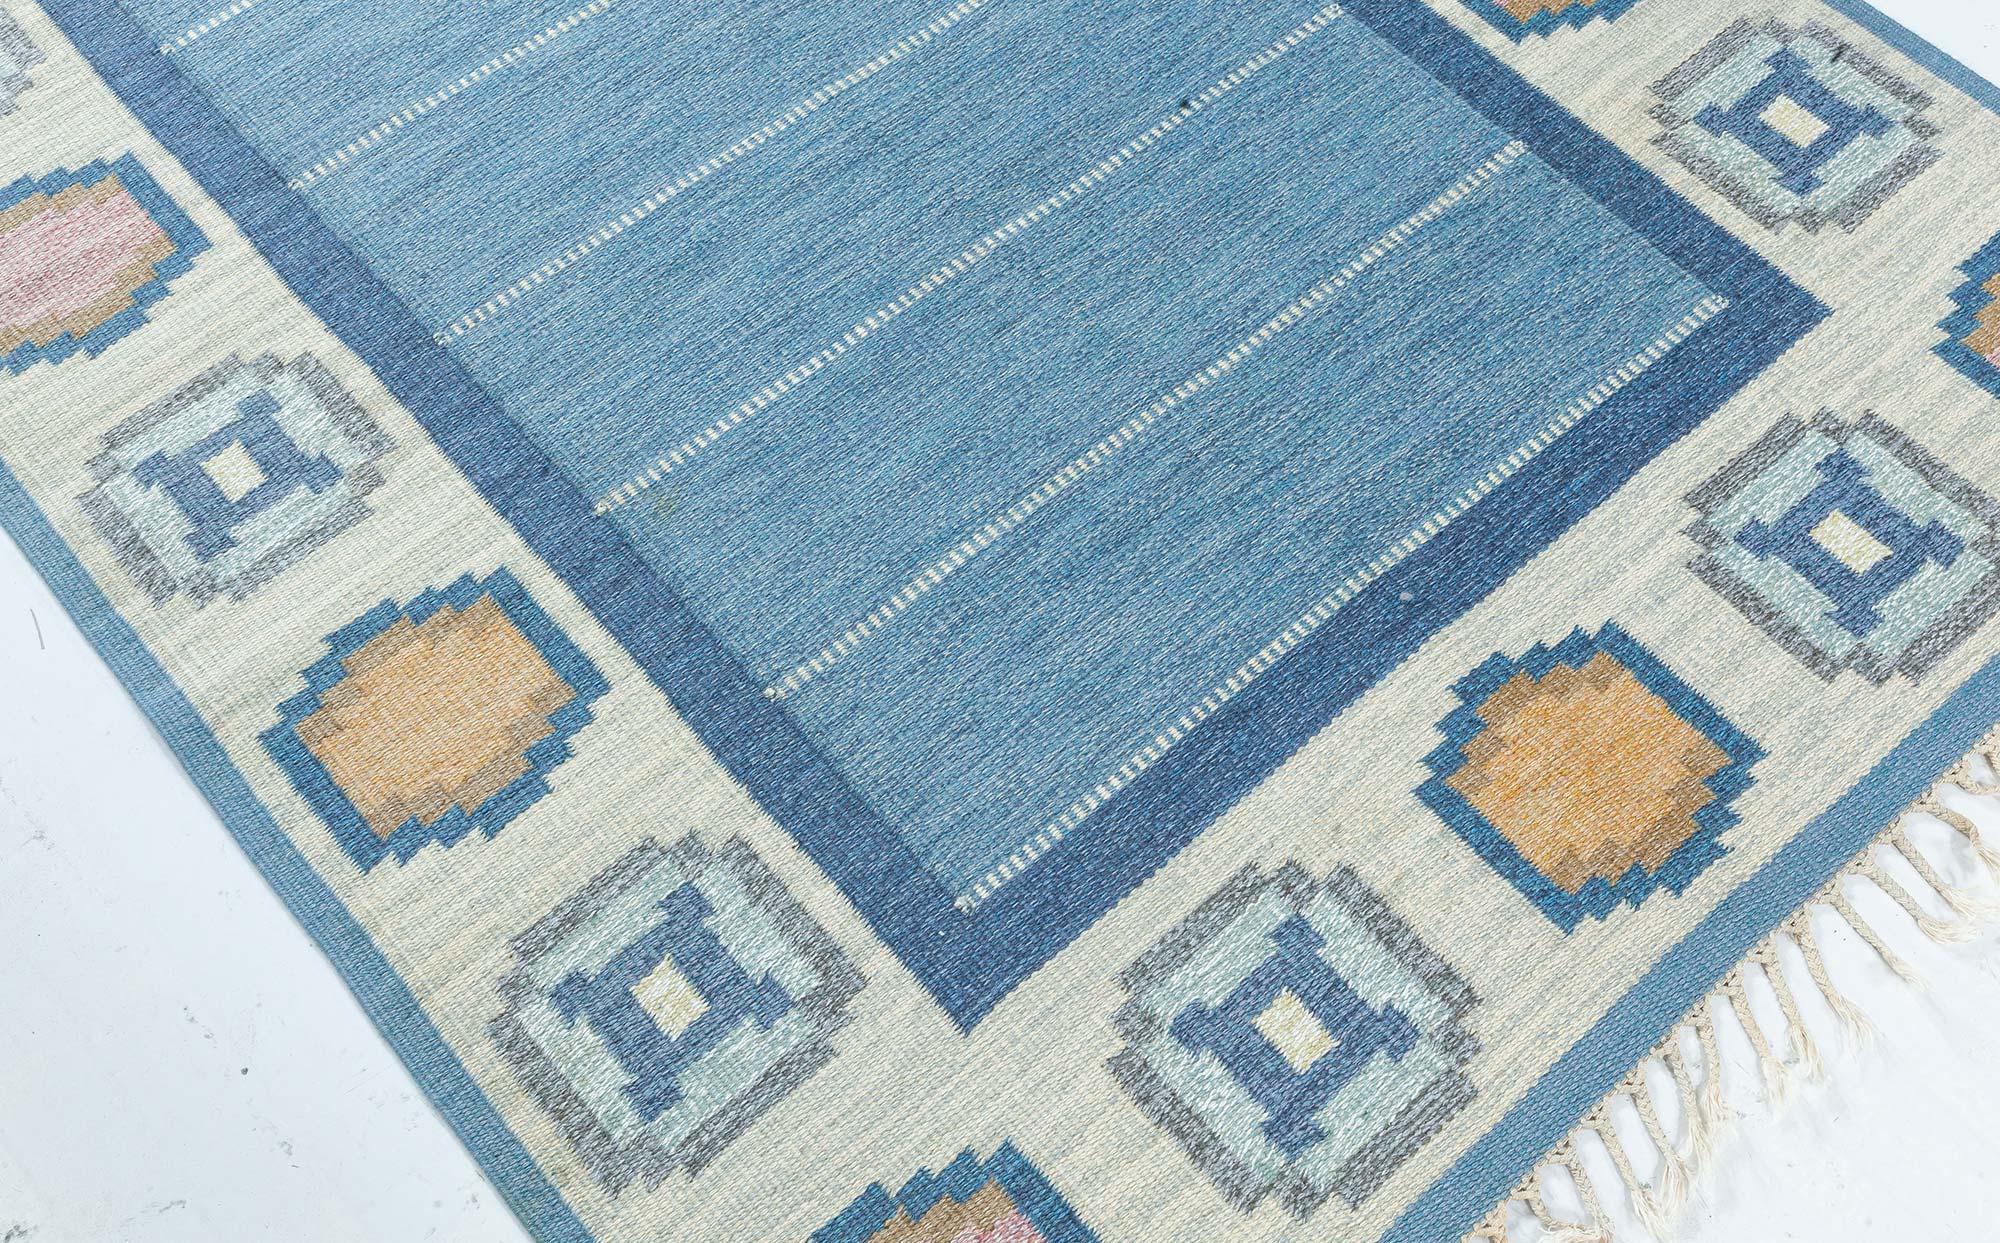 Hand-Woven Vintage Swedish Flat Woven Rug by Ingegerd Silow For Sale